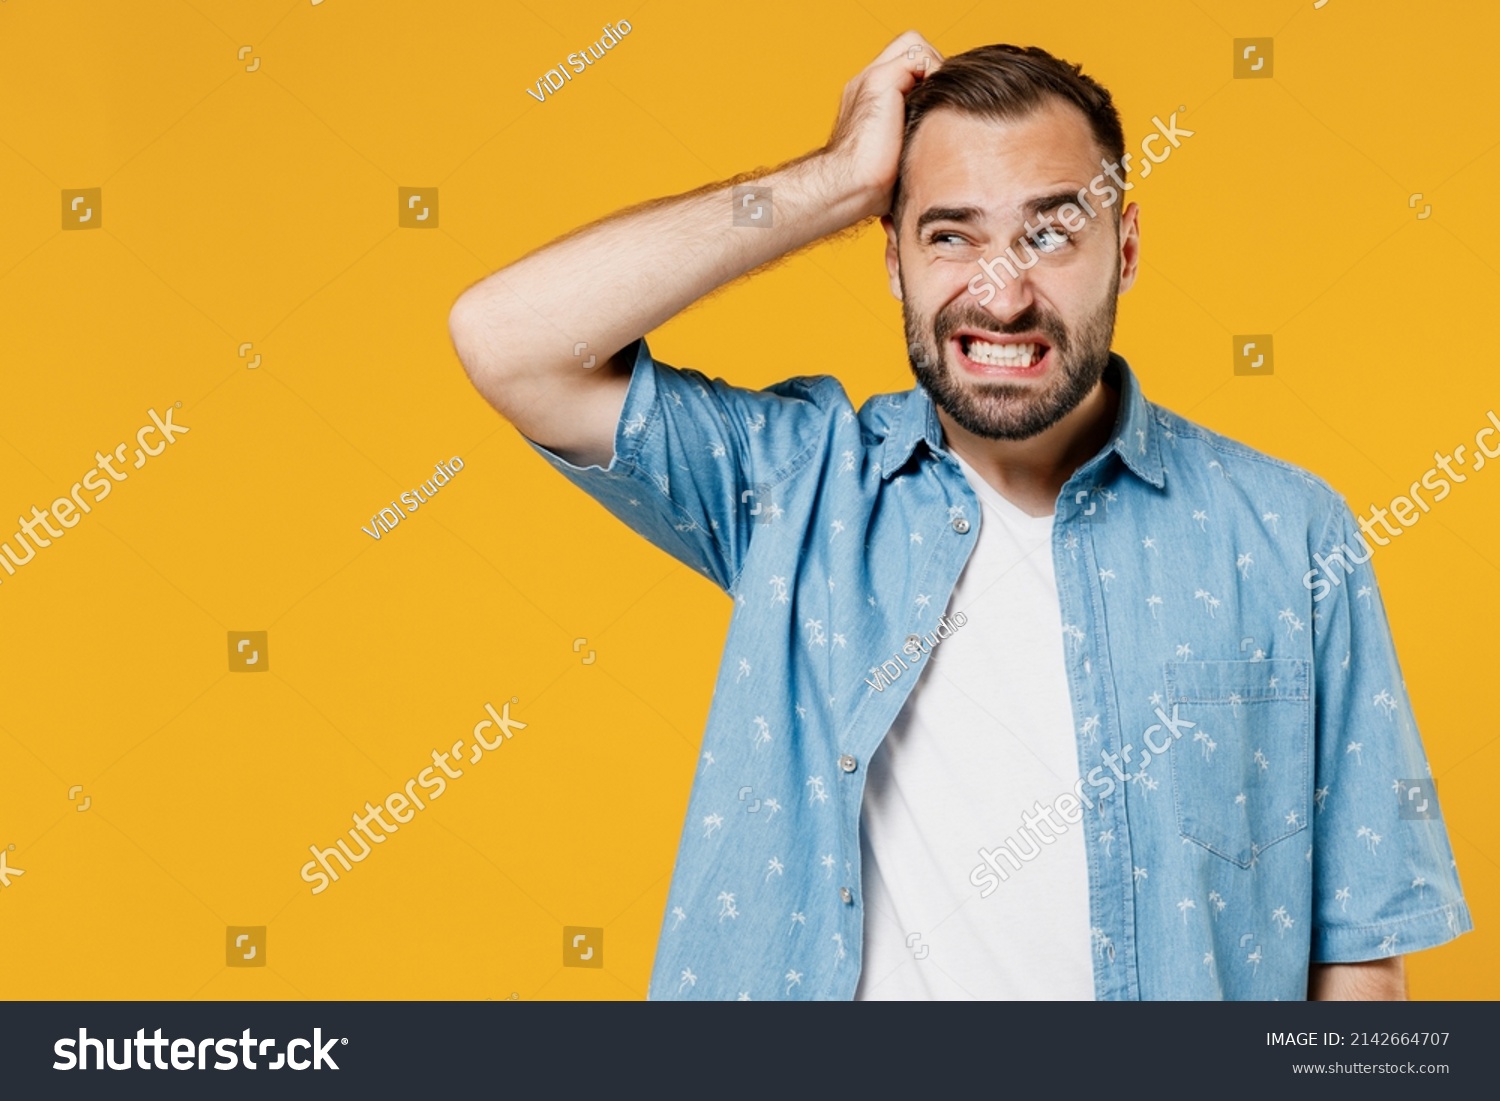 Young puzzled embarrassed bewildered caucasian man 20s wearing blue shirt white t-shirt scratch head look aside say oops isolated on plain yellow background studio portrait. People lifestyle concept #2142664707